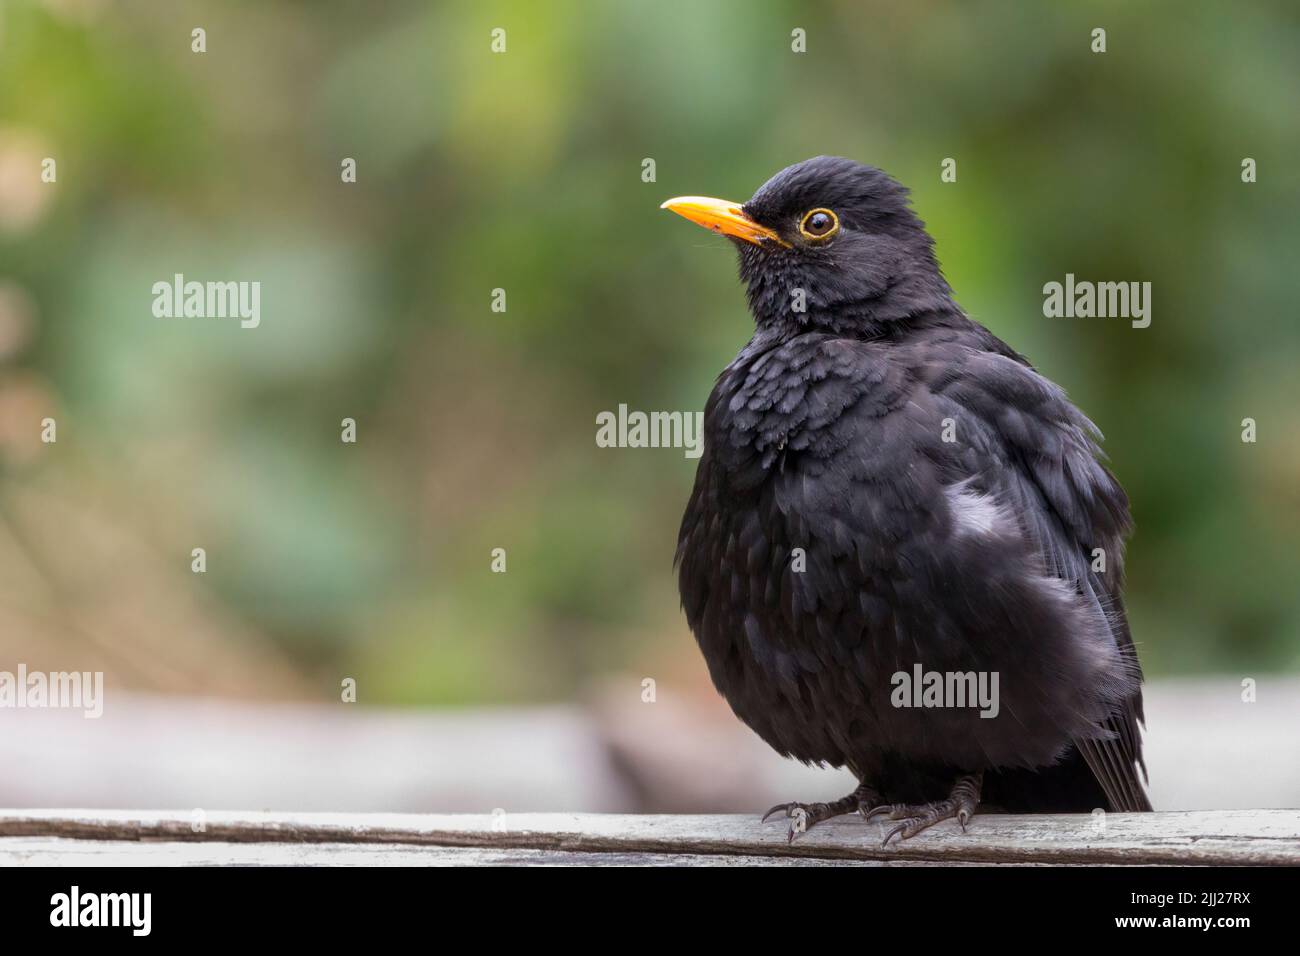 Blackbird turdus merula fluffed up plumage some white feathers showing on breast. Yellow bill and eye ring may be juvenile bird, soft background Stock Photo